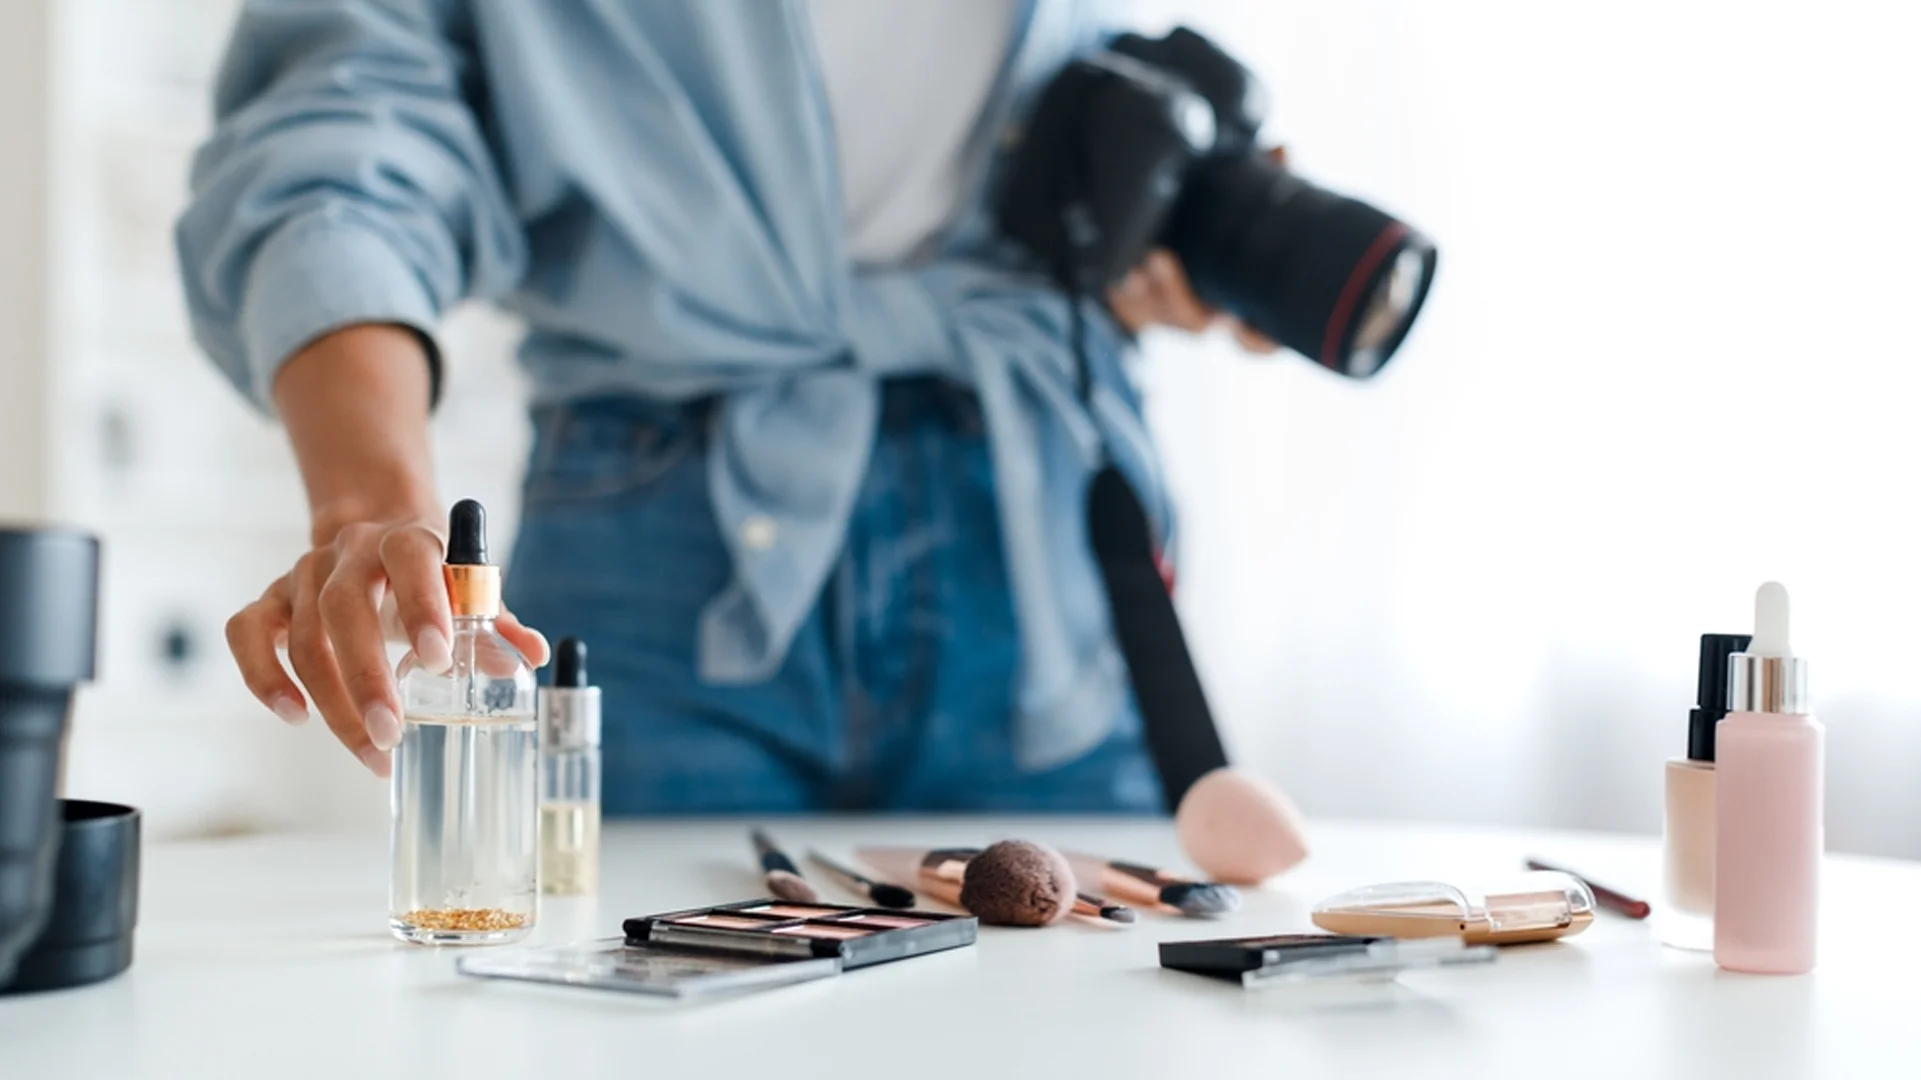 A Guide On How To Take Good Product Photography